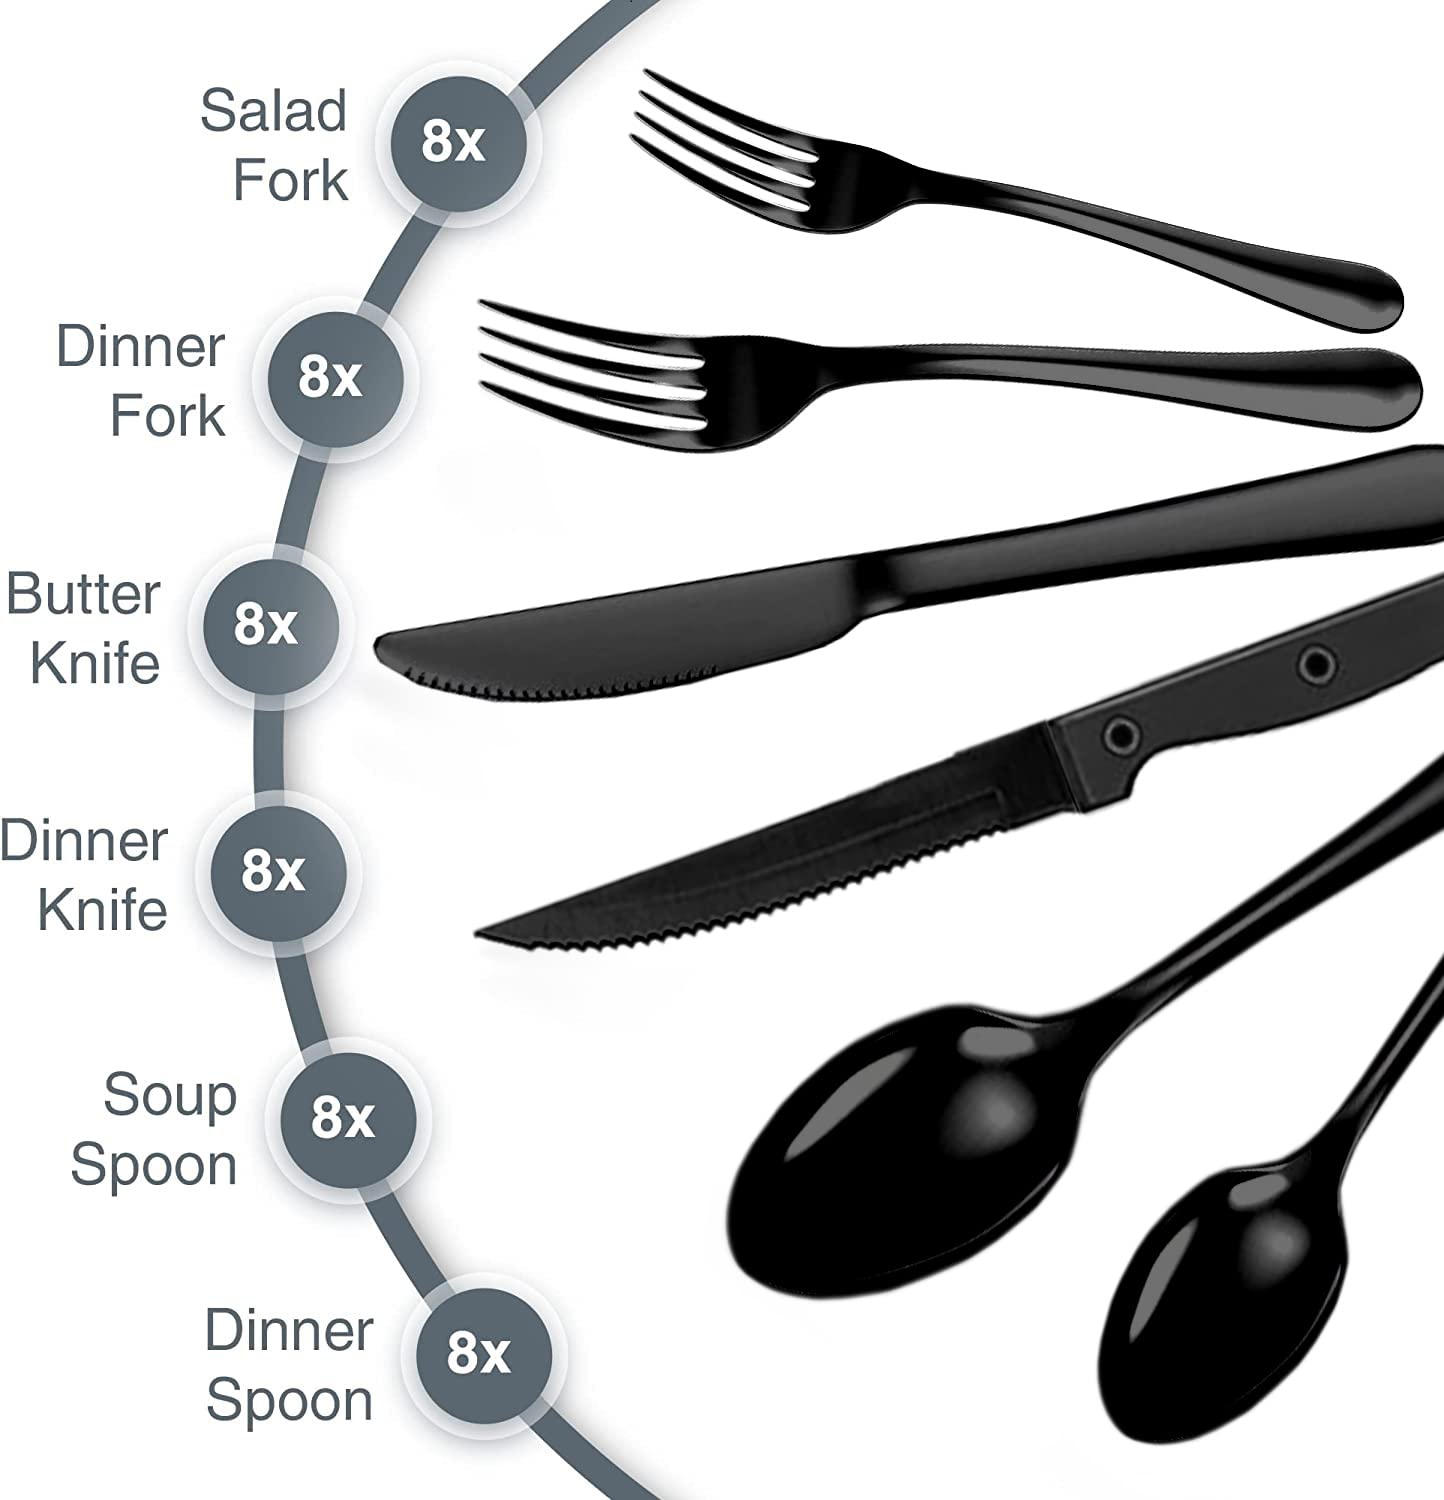 Tribal Cooking 49 Piece Silverware Set - Service for 8 - Stainless Steel Flatware serving set - Cutlery Set - Knives, Fork, and Spoon - Dishwasher Safe - Stunning Polished Finish - Black